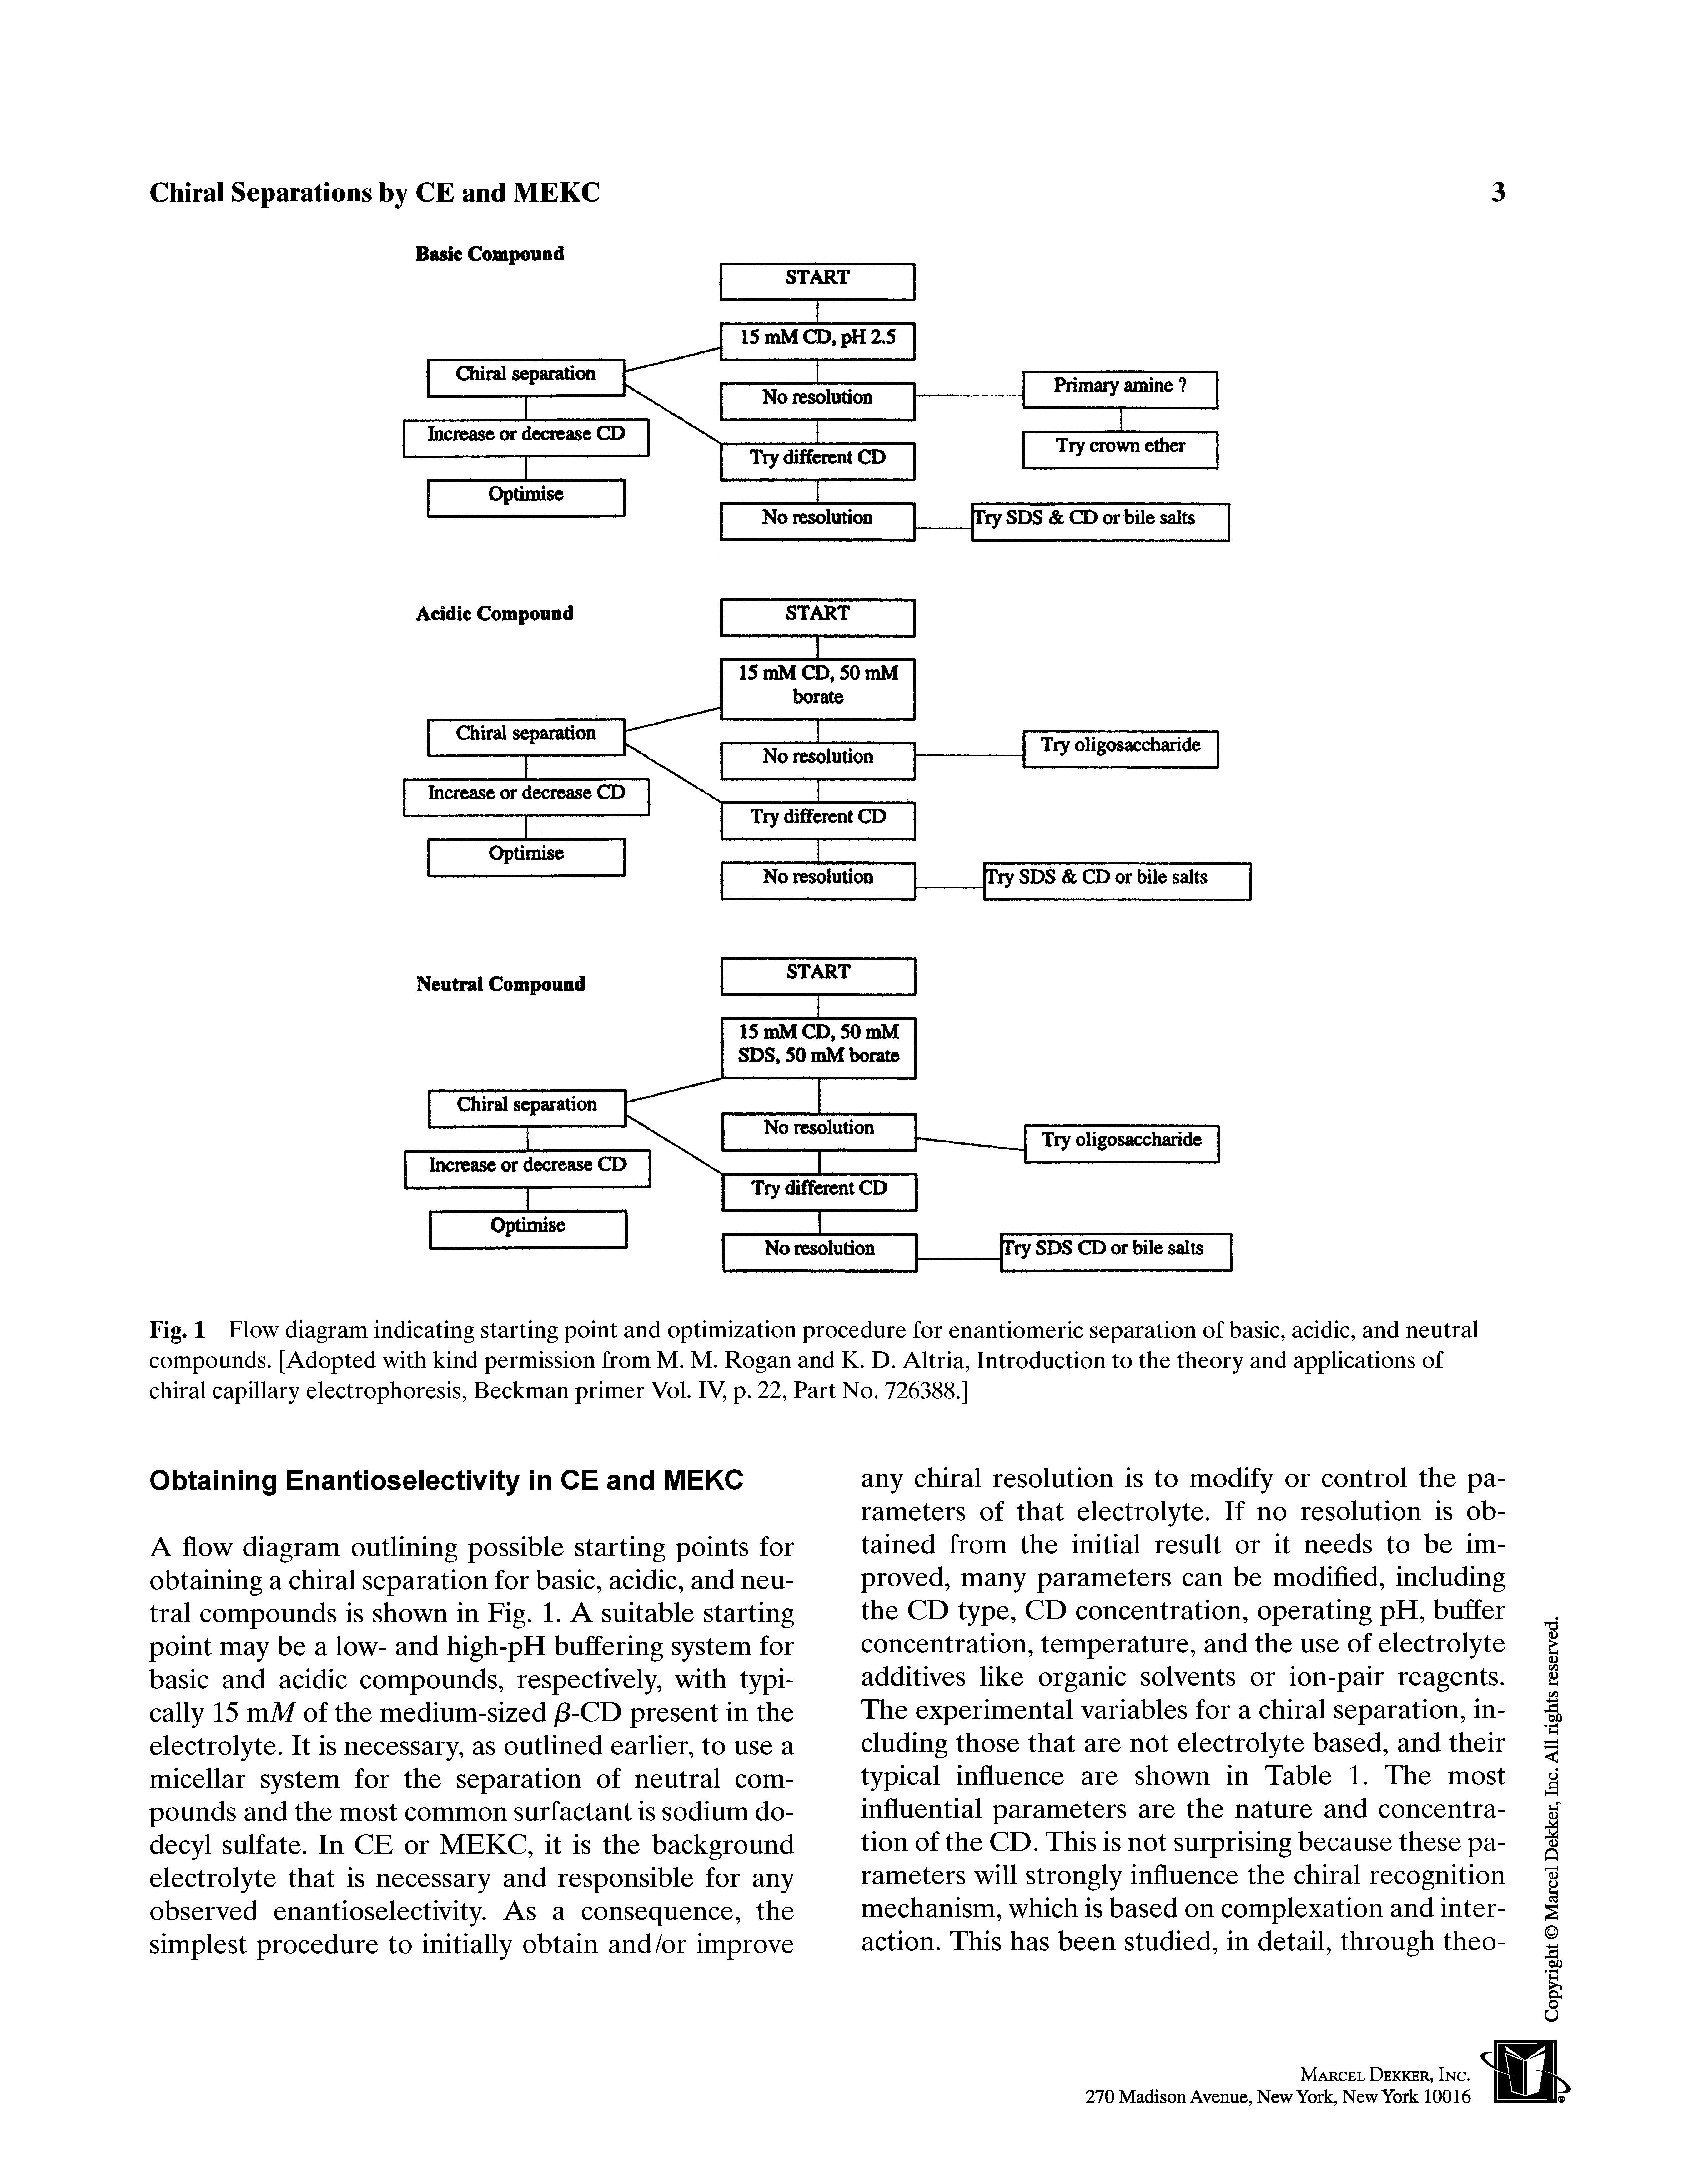 Fig. 1 Flow diagram indicating starting point and optimization procedure for enantiomeric separation of basic, acidic, and neutral compounds. [Adopted with kind permission from M. M. Rogan and K. D. Altria, Introduction to the theory and applications of chiral capillary electrophoresis, Beckman primer Vol. IV, p. 22, Part No. 726388.]...